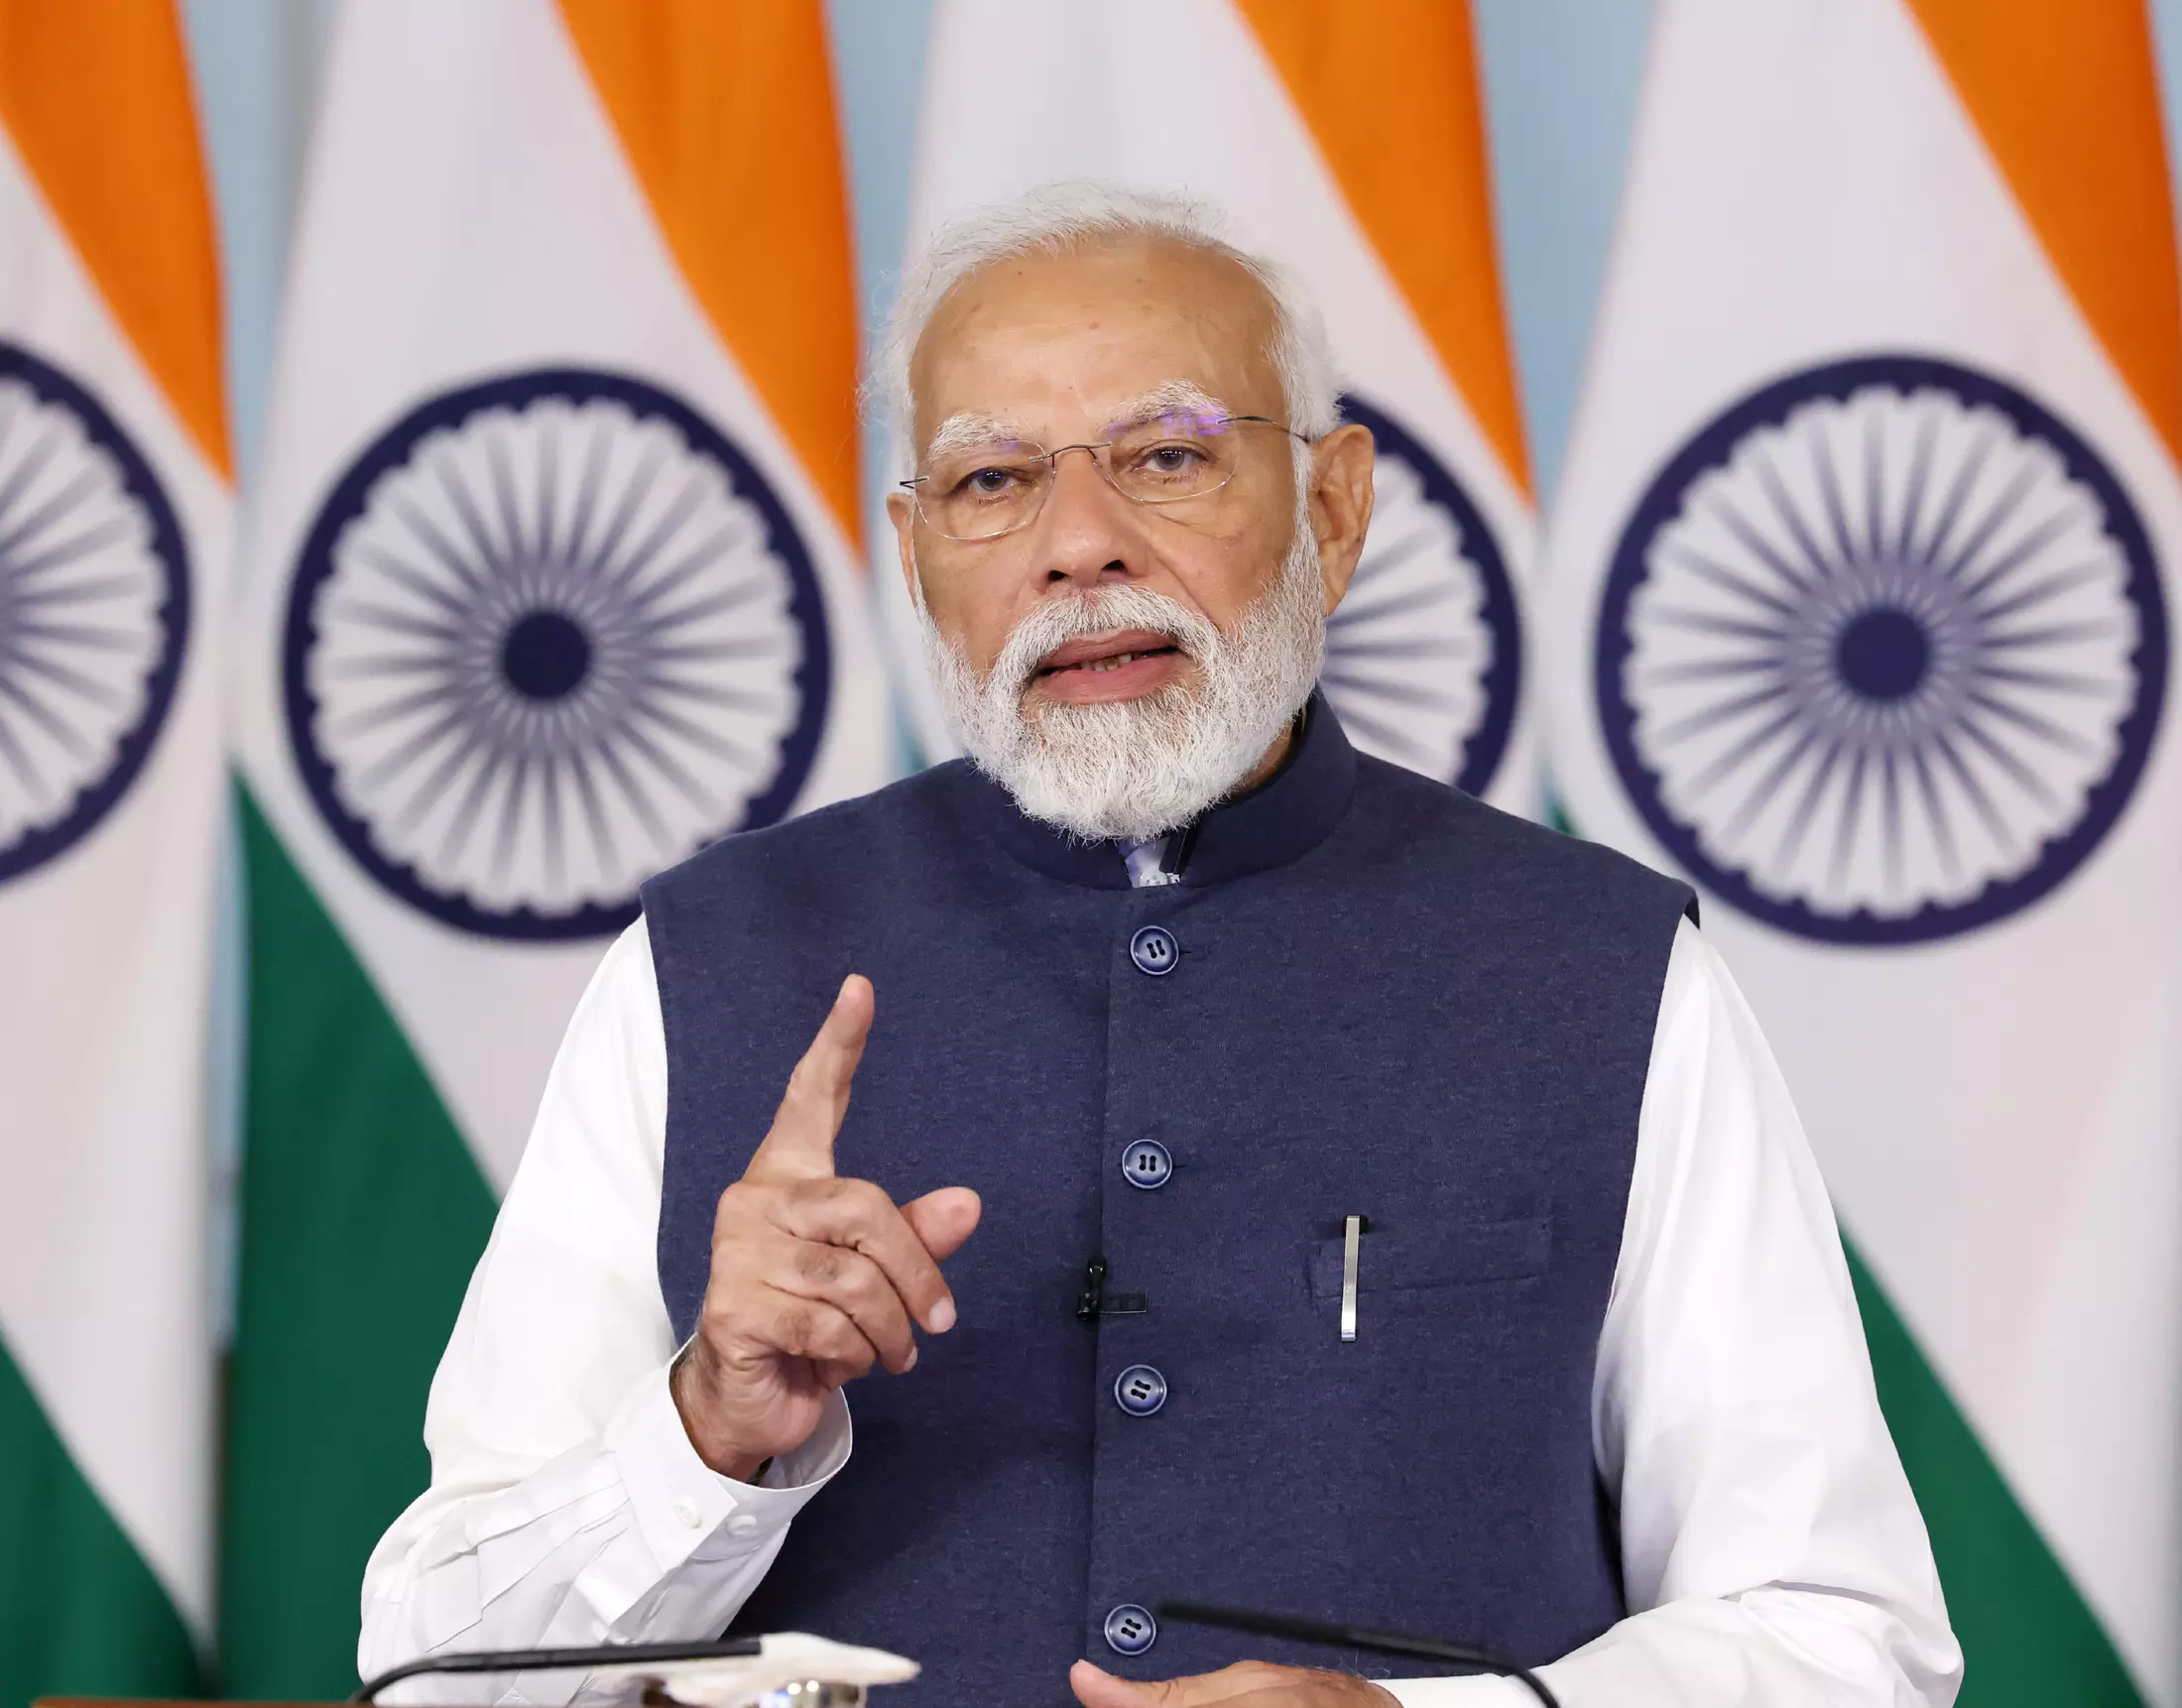 Every Indian angered by Congress’ actions on Katchatheevu: PM Modi